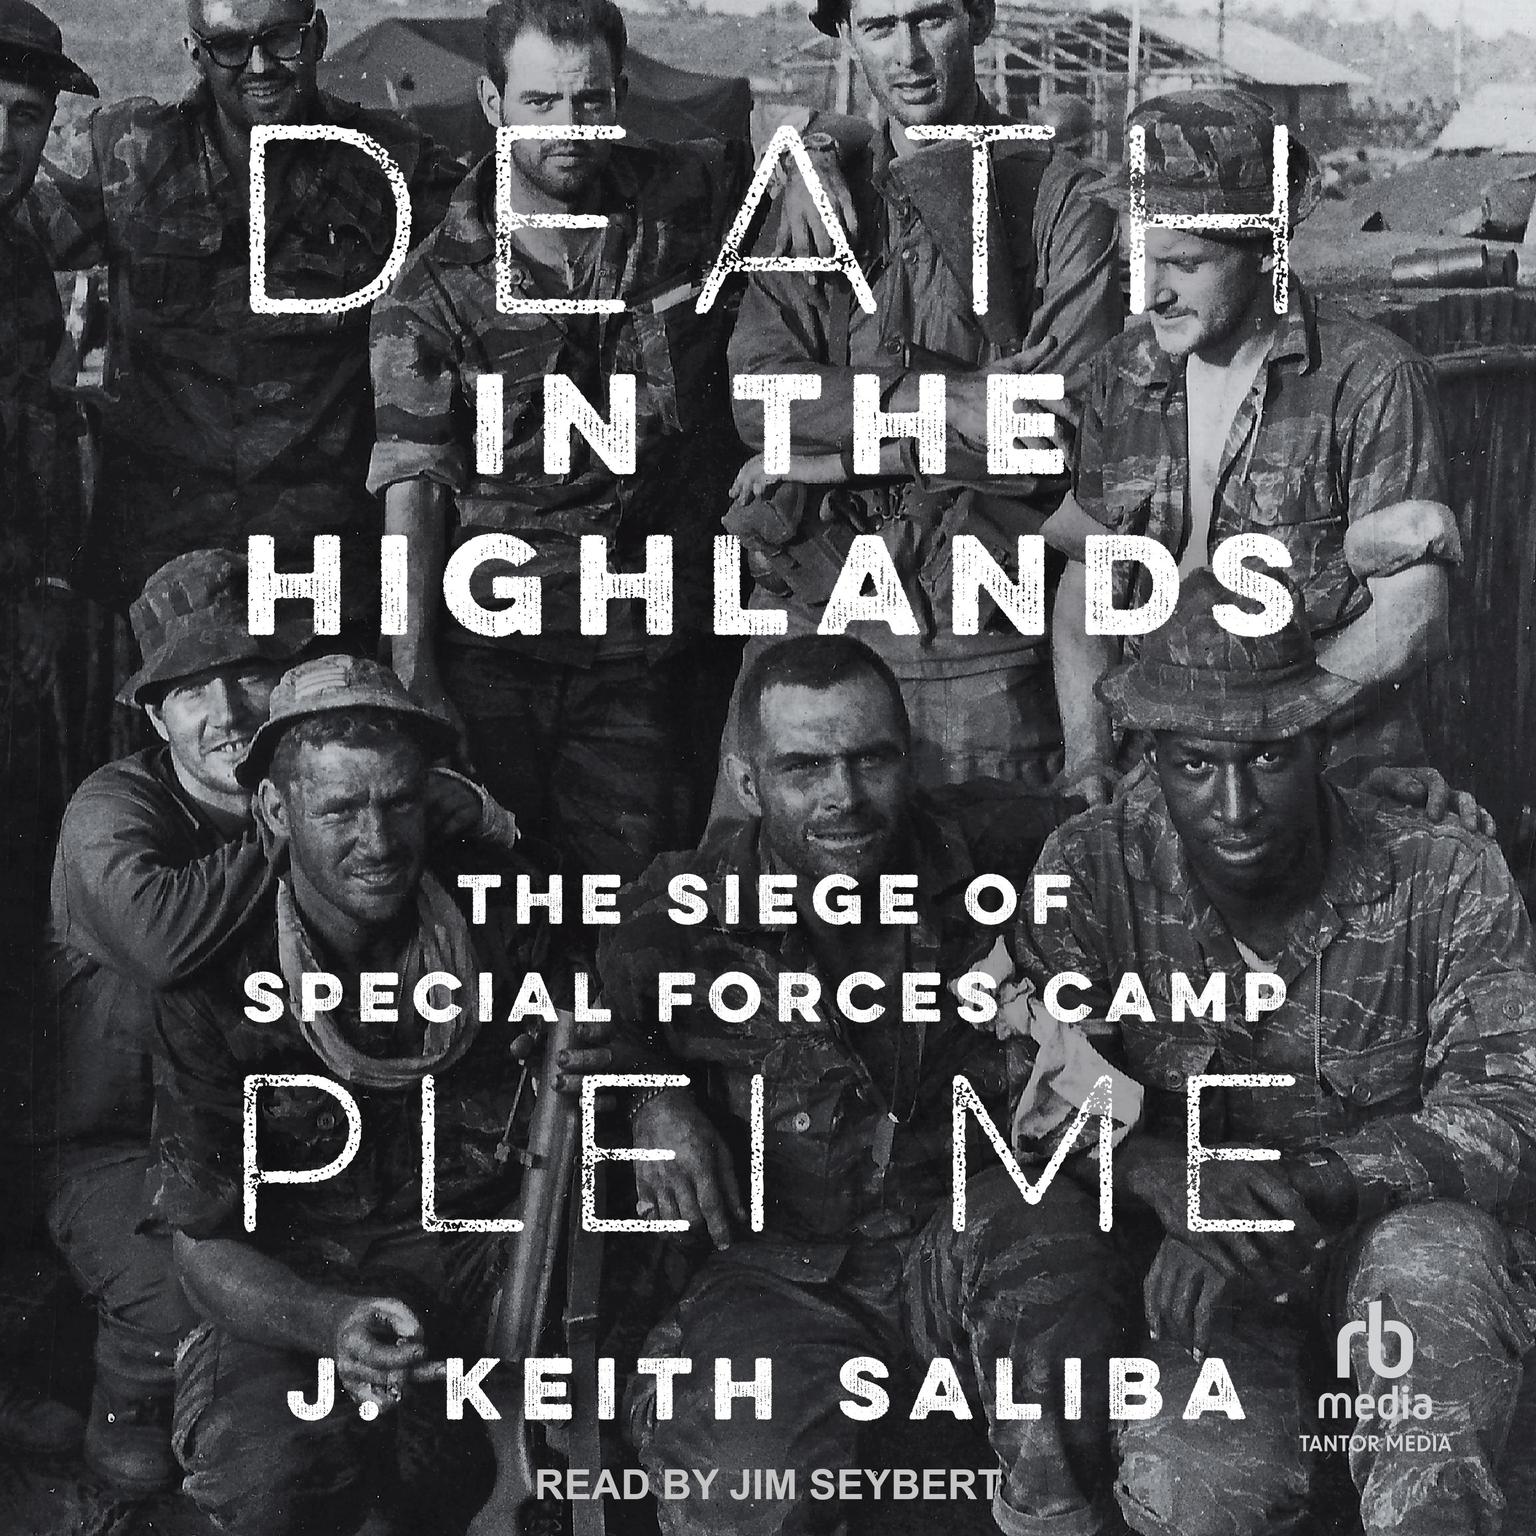 Death in the Highlands: The Siege of Special Forces Camp Plei Me Audiobook, by J. Keith Saliba